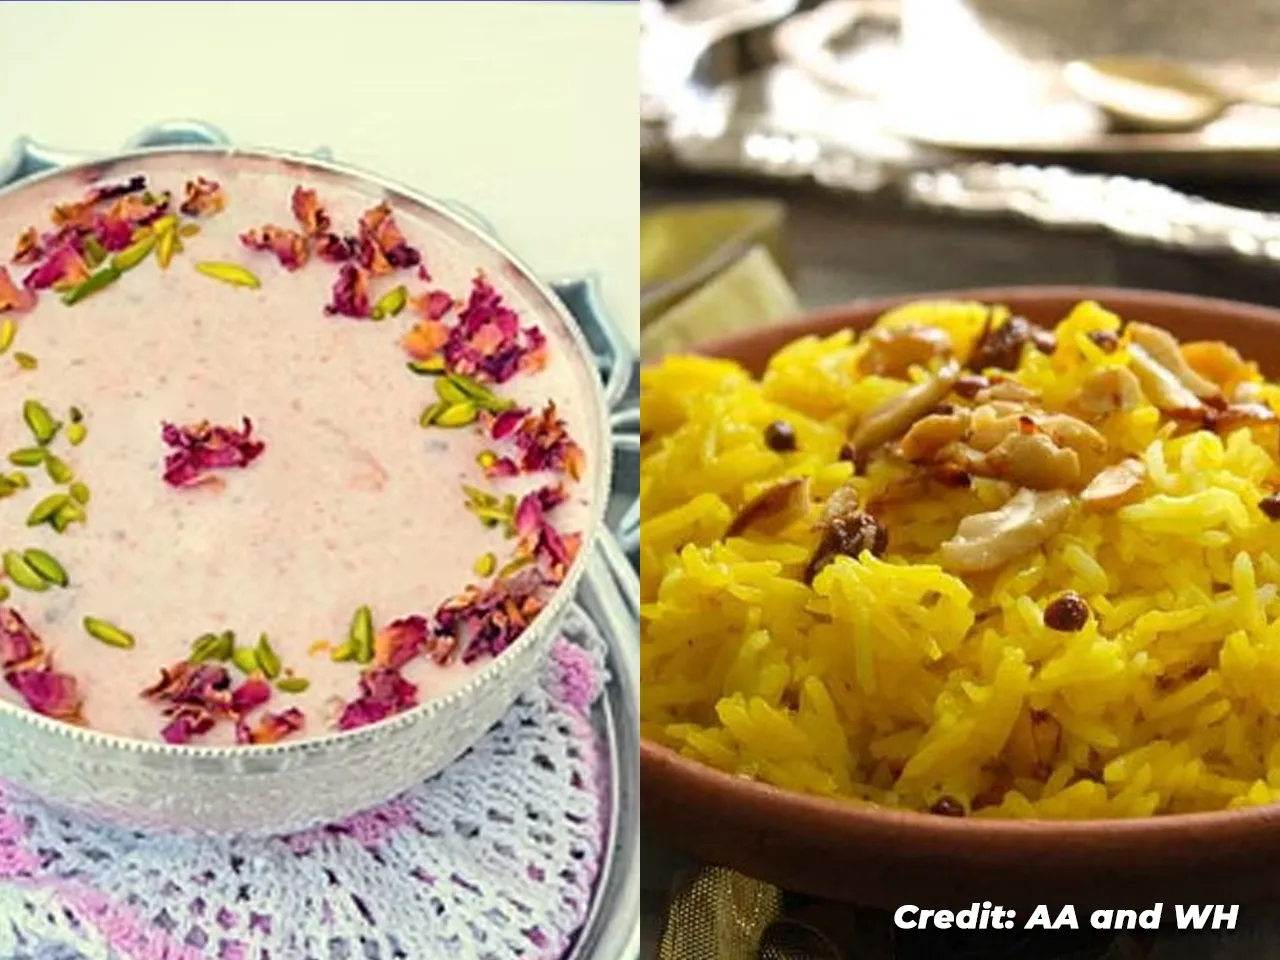 Did you know that Meethey Chawal, Kheer, and Kadhi are essentials in the Baisakhi feast?